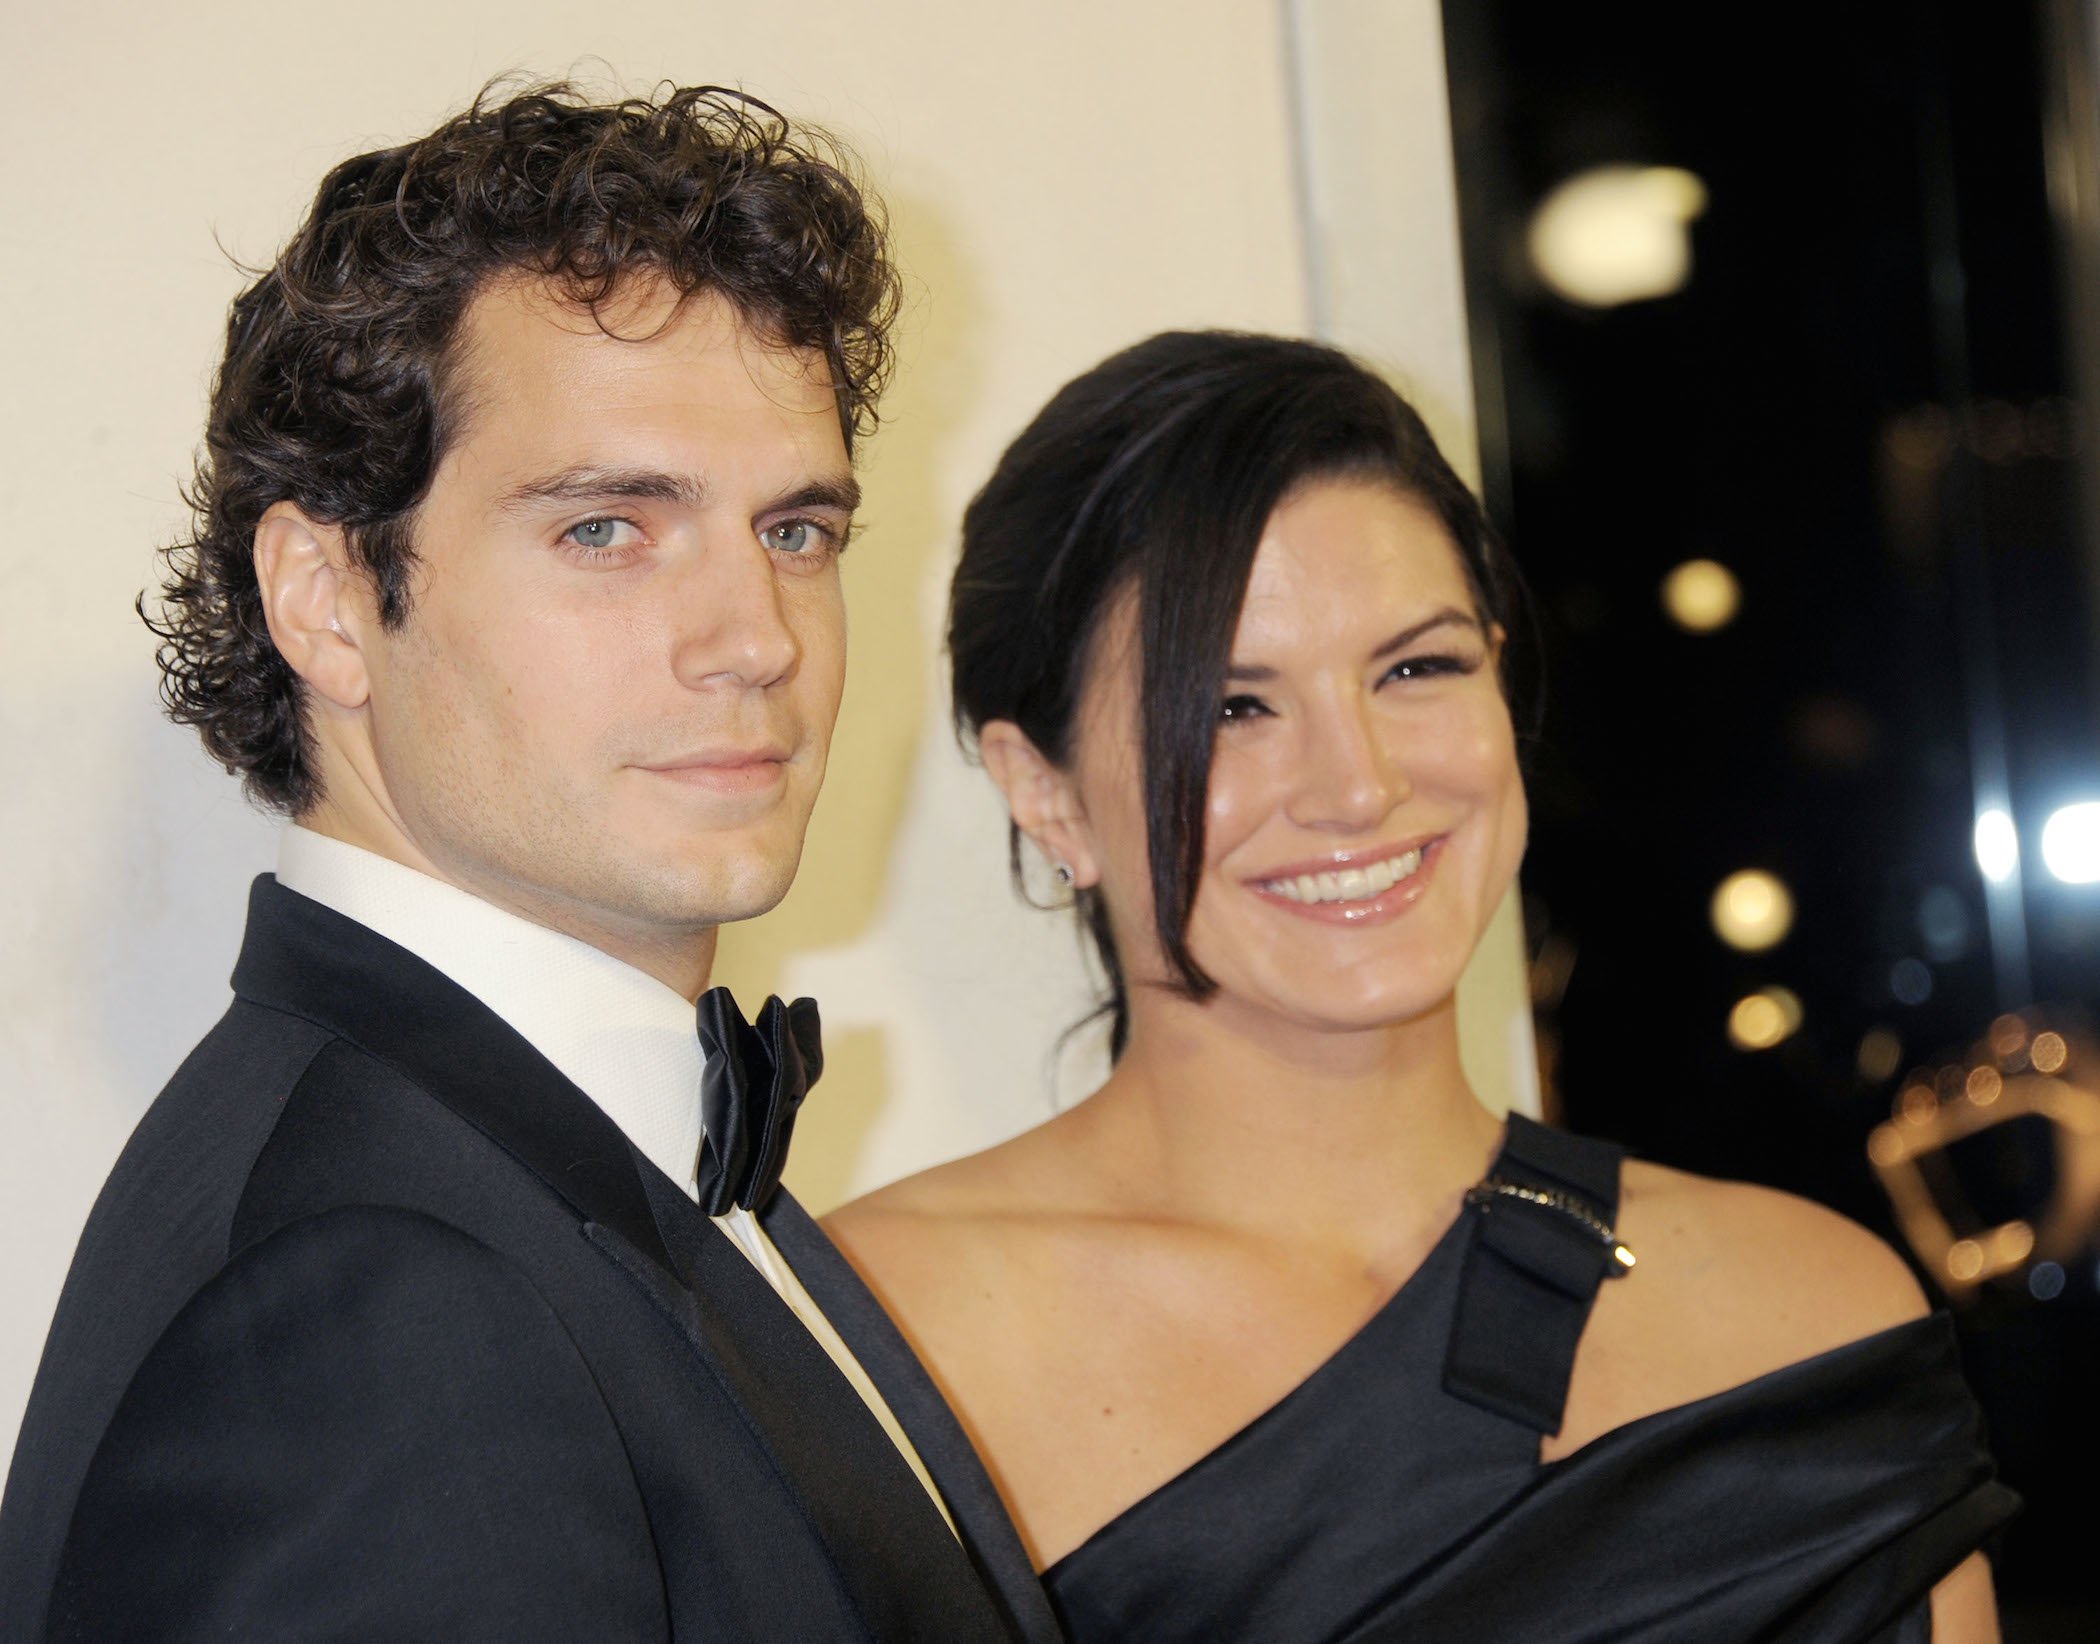 Henry Cavill and Gina Carano smiling together at a cocktail party